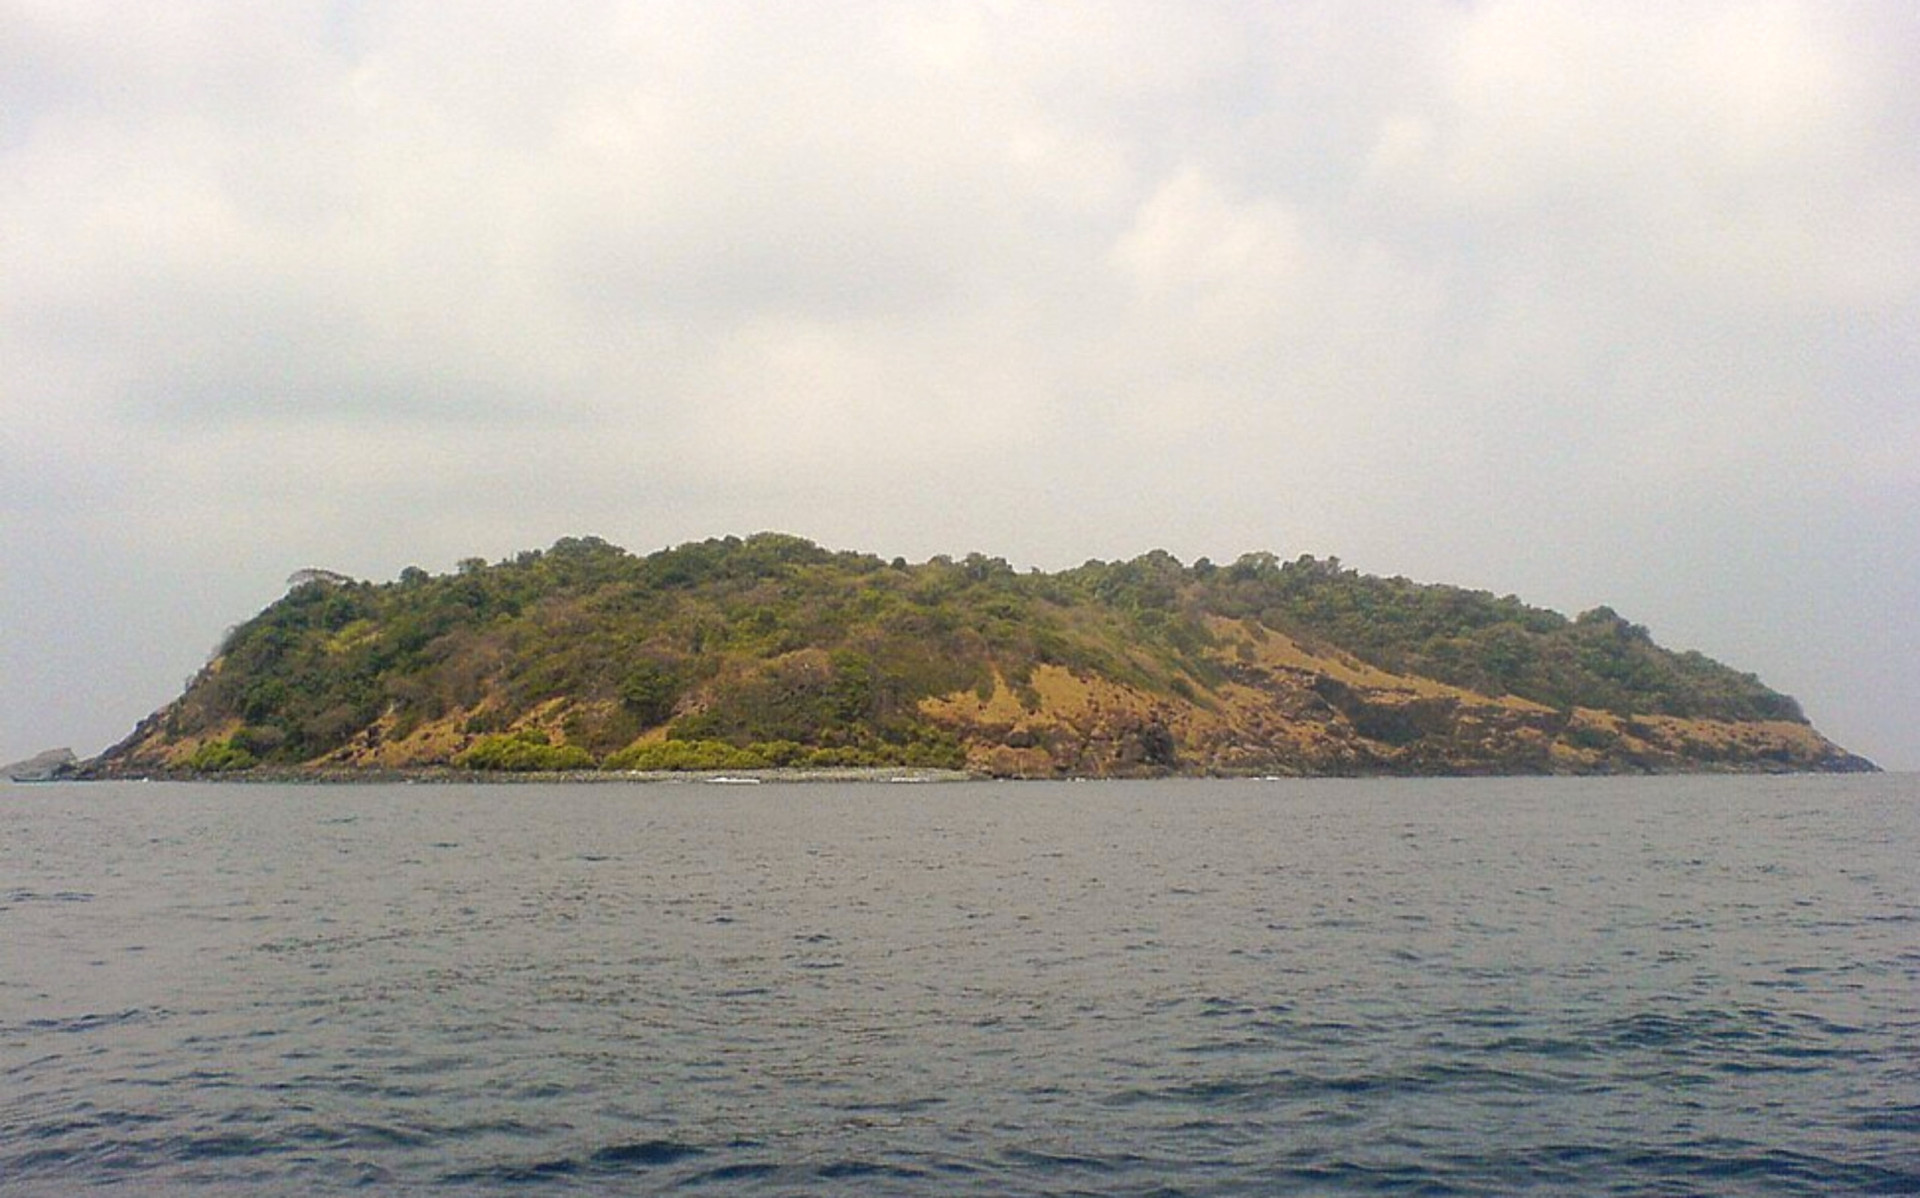 <p>Netrani Island is moored off the coast of Karnataka in the Arabian Sea. A coral island whose reefs teem with an impressive variety of sea life, Netrani is also a cultural draw, being the location of the famous Hindu temple Jai Bajrangbali.</p><p>You may also like:<a href="https://www.starsinsider.com/n/485053?utm_source=msn.com&utm_medium=display&utm_campaign=referral_description&utm_content=689150en-nz"> Legendary musicians and their signature instruments</a></p>